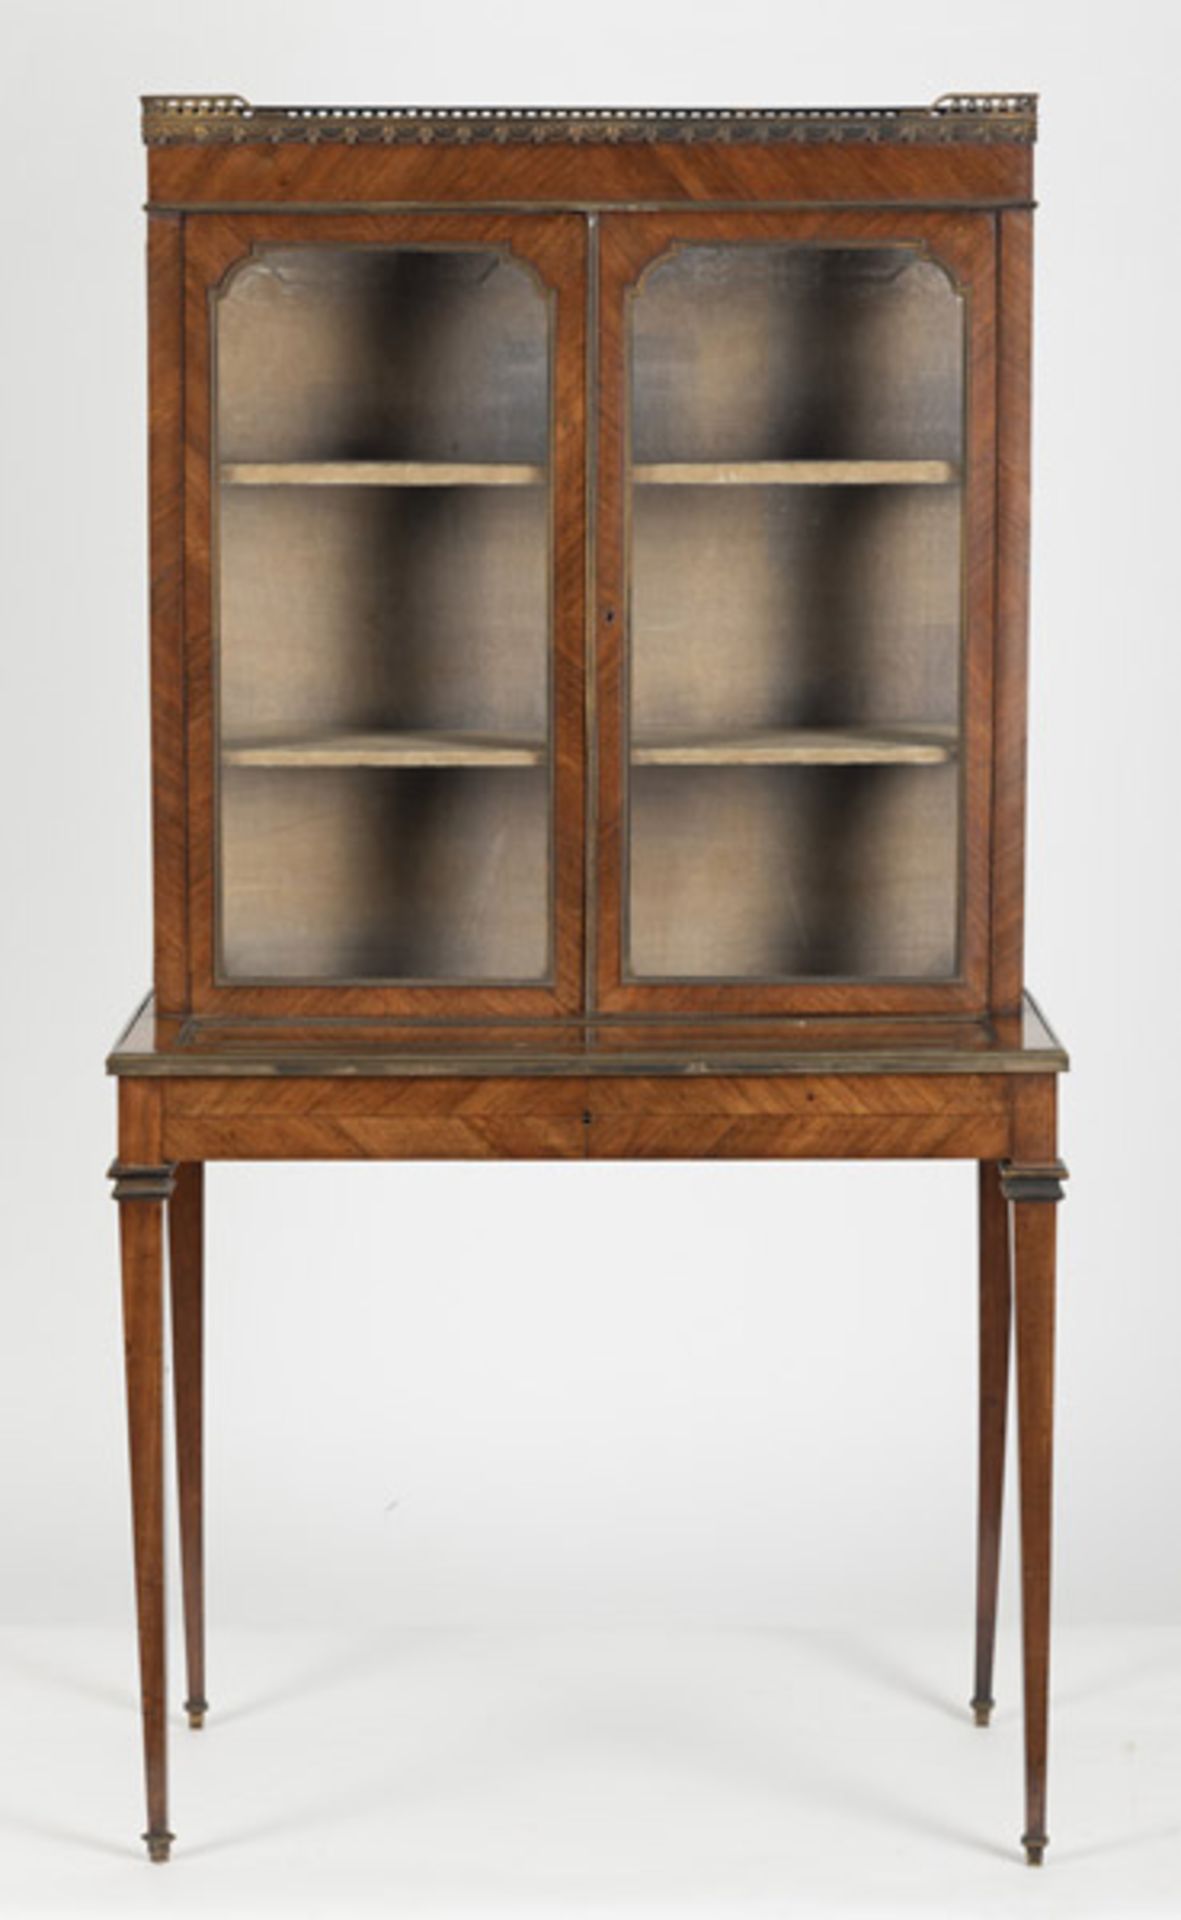 A BRASS MOUNTED MAHOGANY LOUIS XVI STYLE DISPLAY CABINET - Image 8 of 8